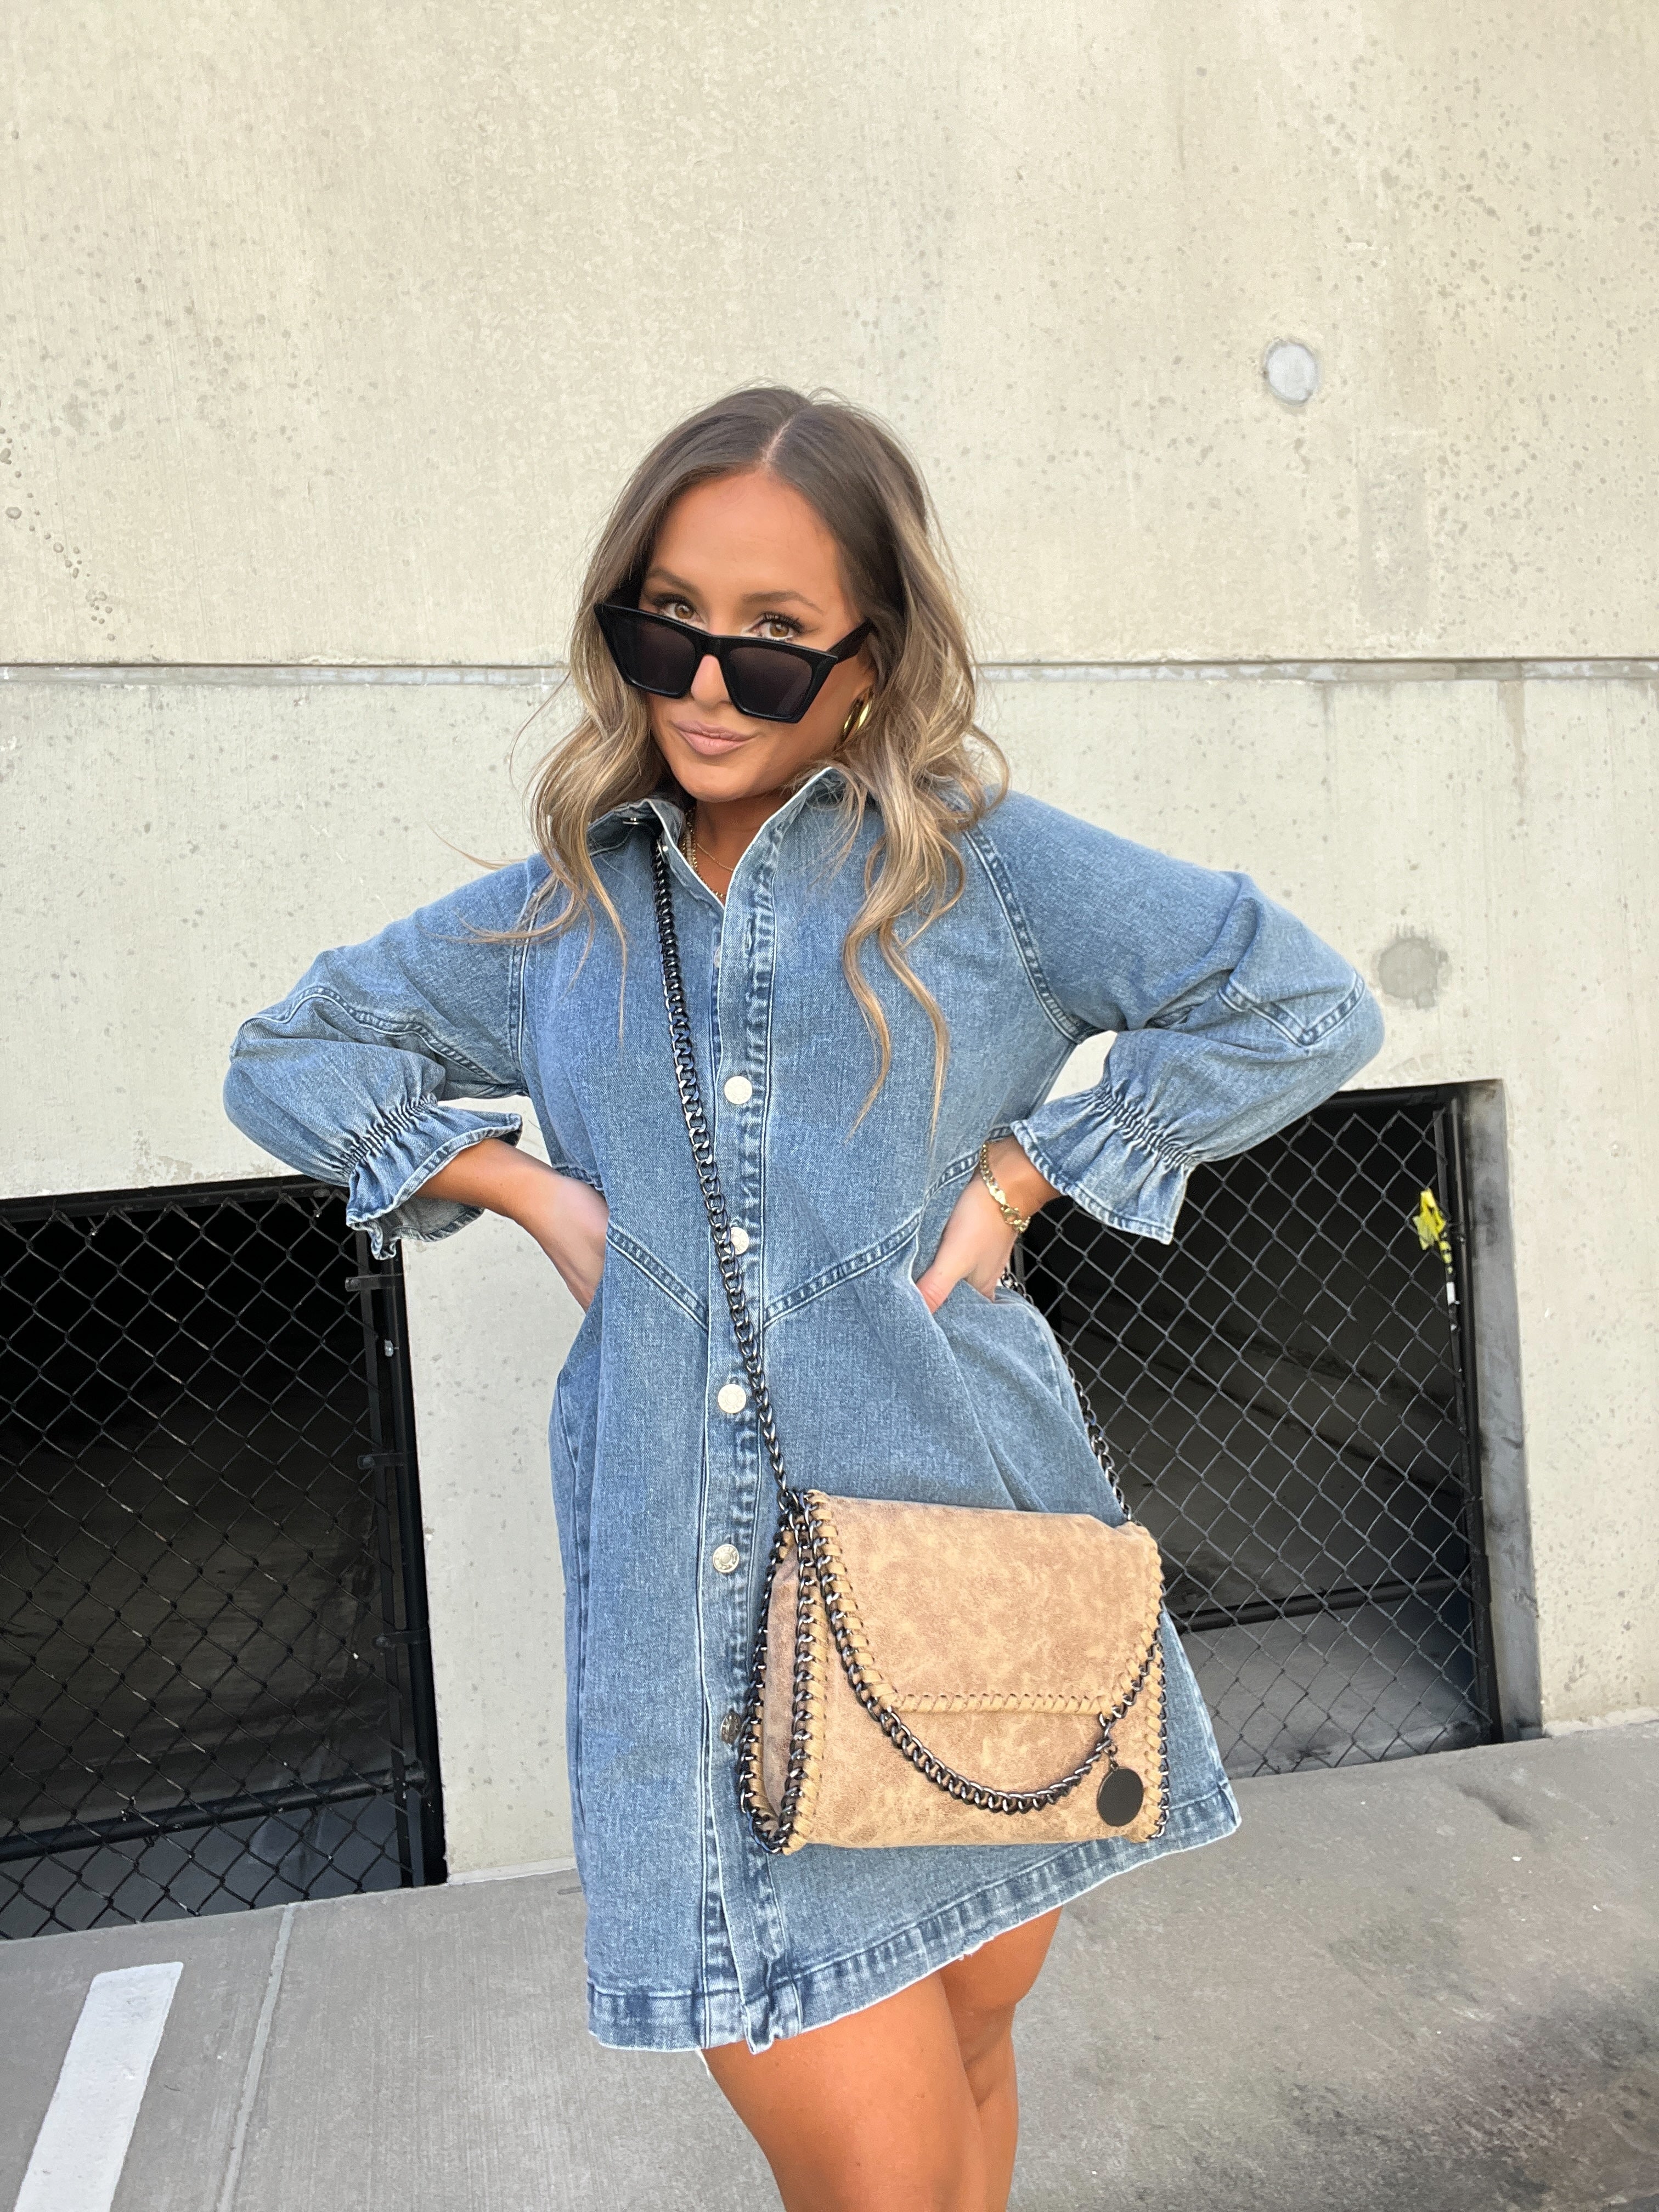 Best Ways To Wear Denim Dresses | Style Tips For All Seasons